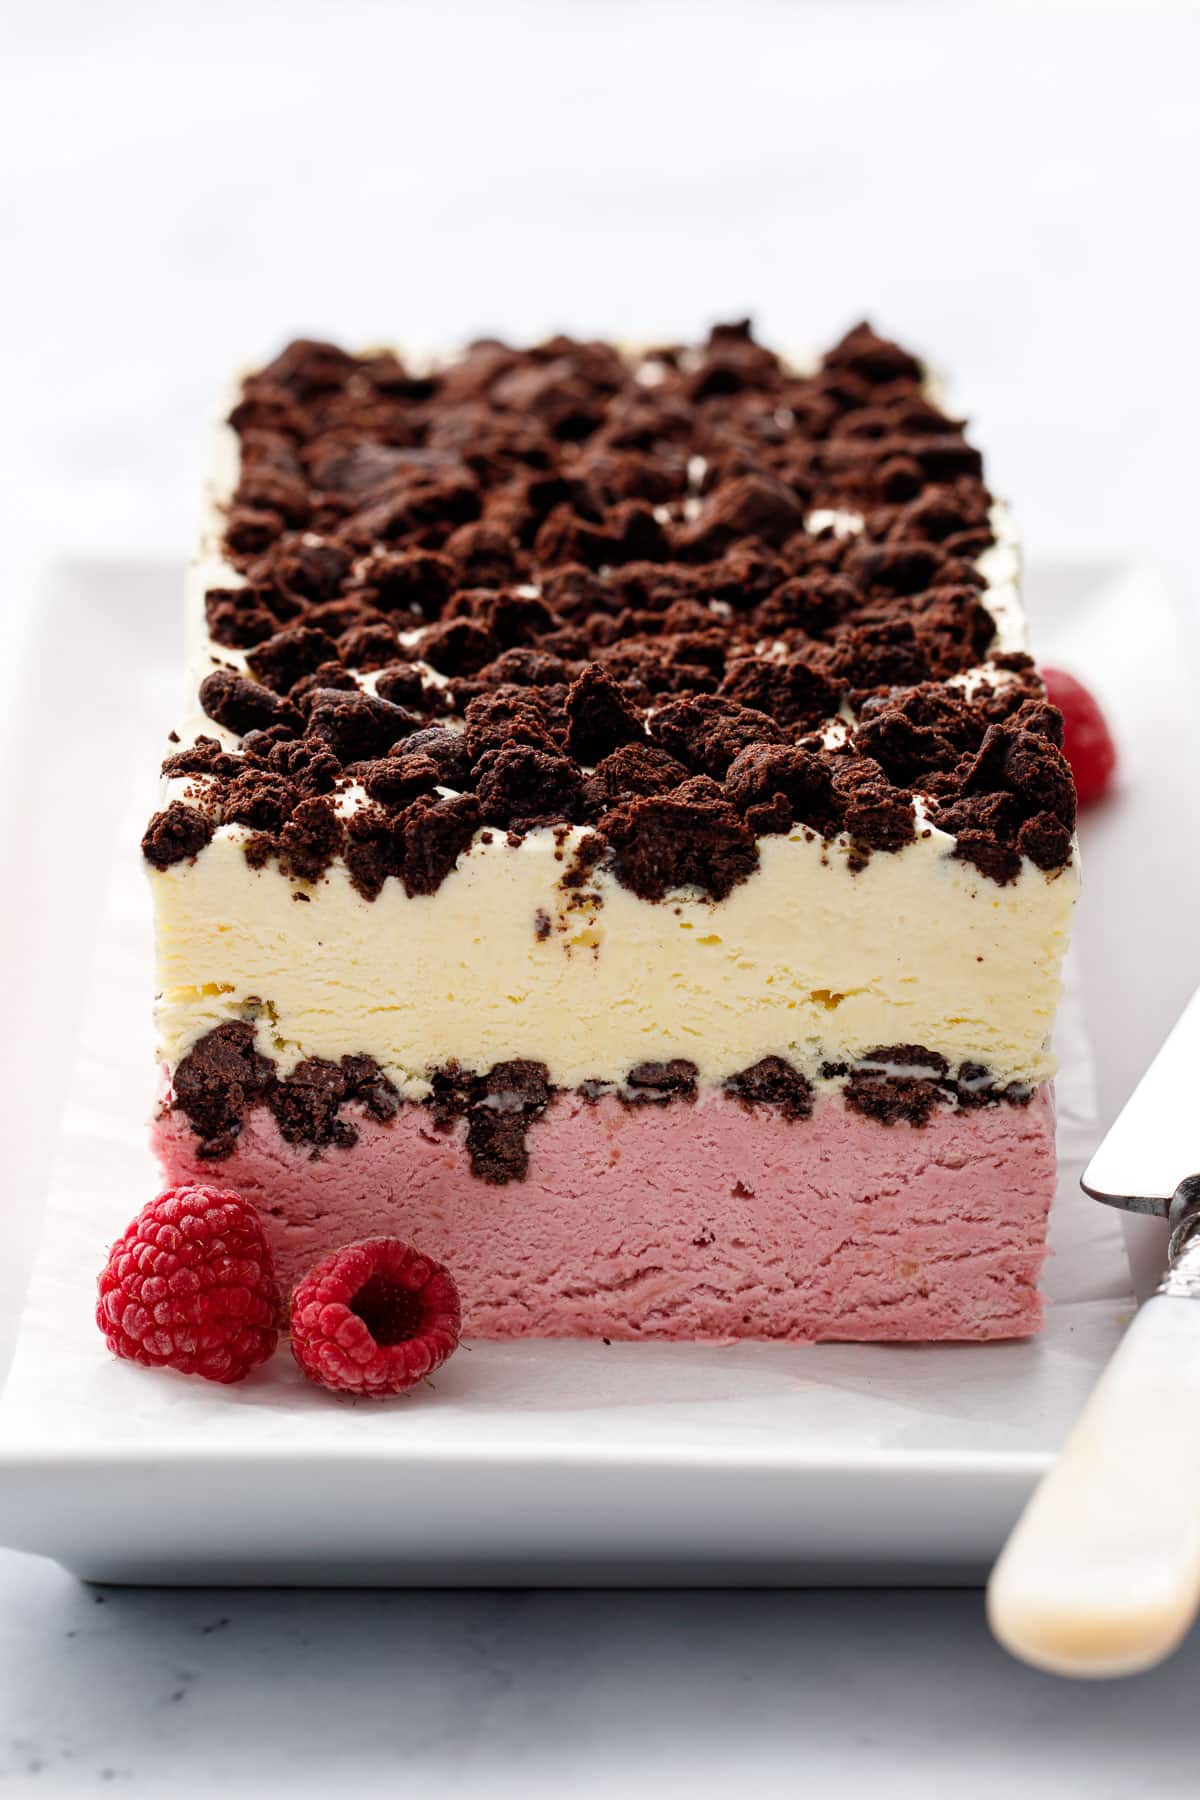 Full loaf of frozen Raspberry & Passionfruit Semifreddo, with visible layers of pink raspberry and pale yellow passionfruit, with Chocolate Crumbs in the middle and on top.